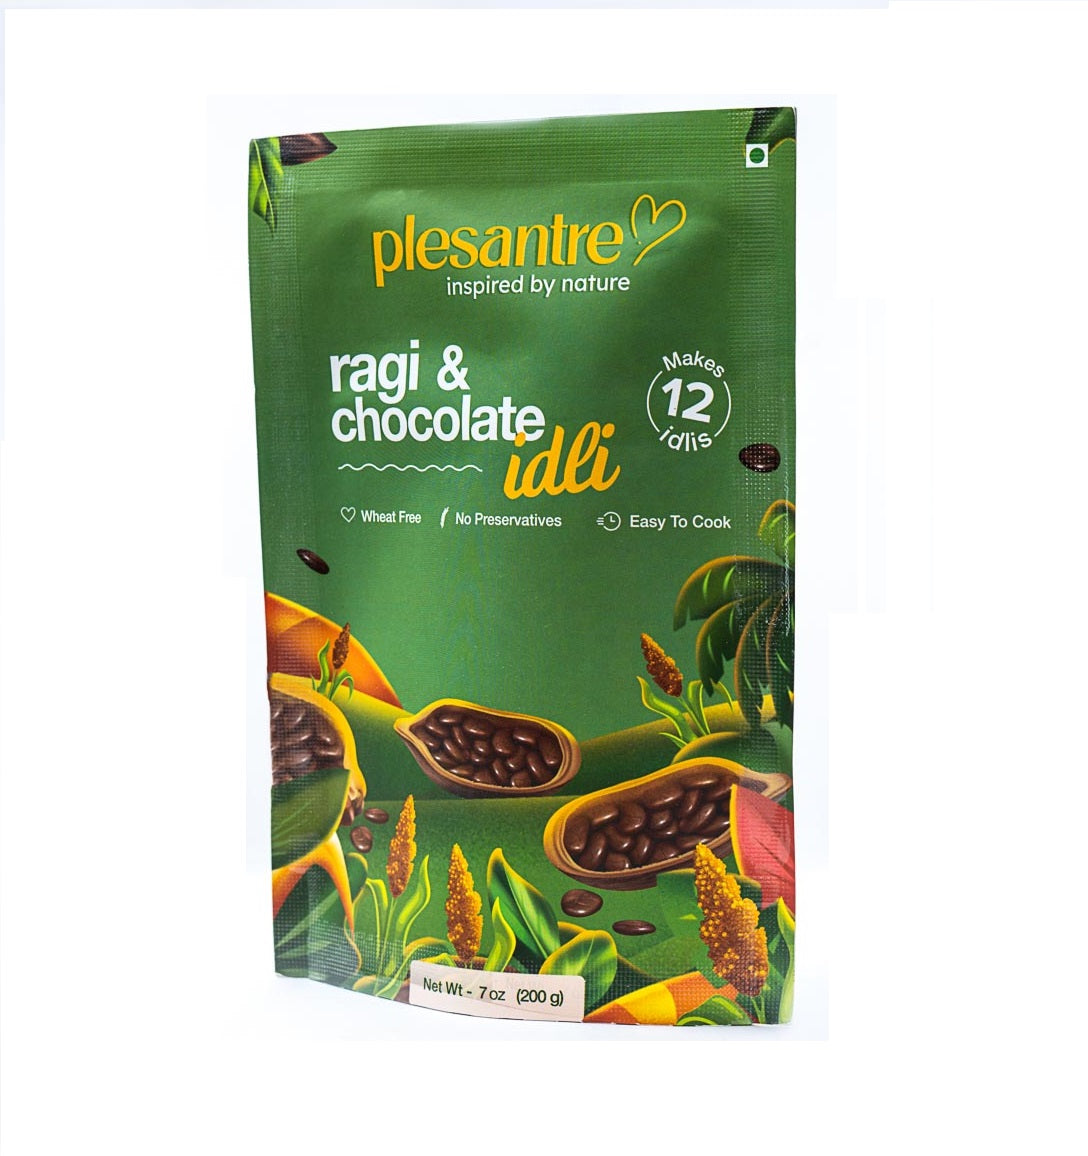 plesantre "Ragi & Chocolate Idli" Instant Idly Batter - Yummy, Healthy & Nutritious Breakfast Premix for You & Your Kids - Wheat Free, Finger Millet Grains, Cocoa, Jaggery - Pack of 2, Makes 24 Idlies